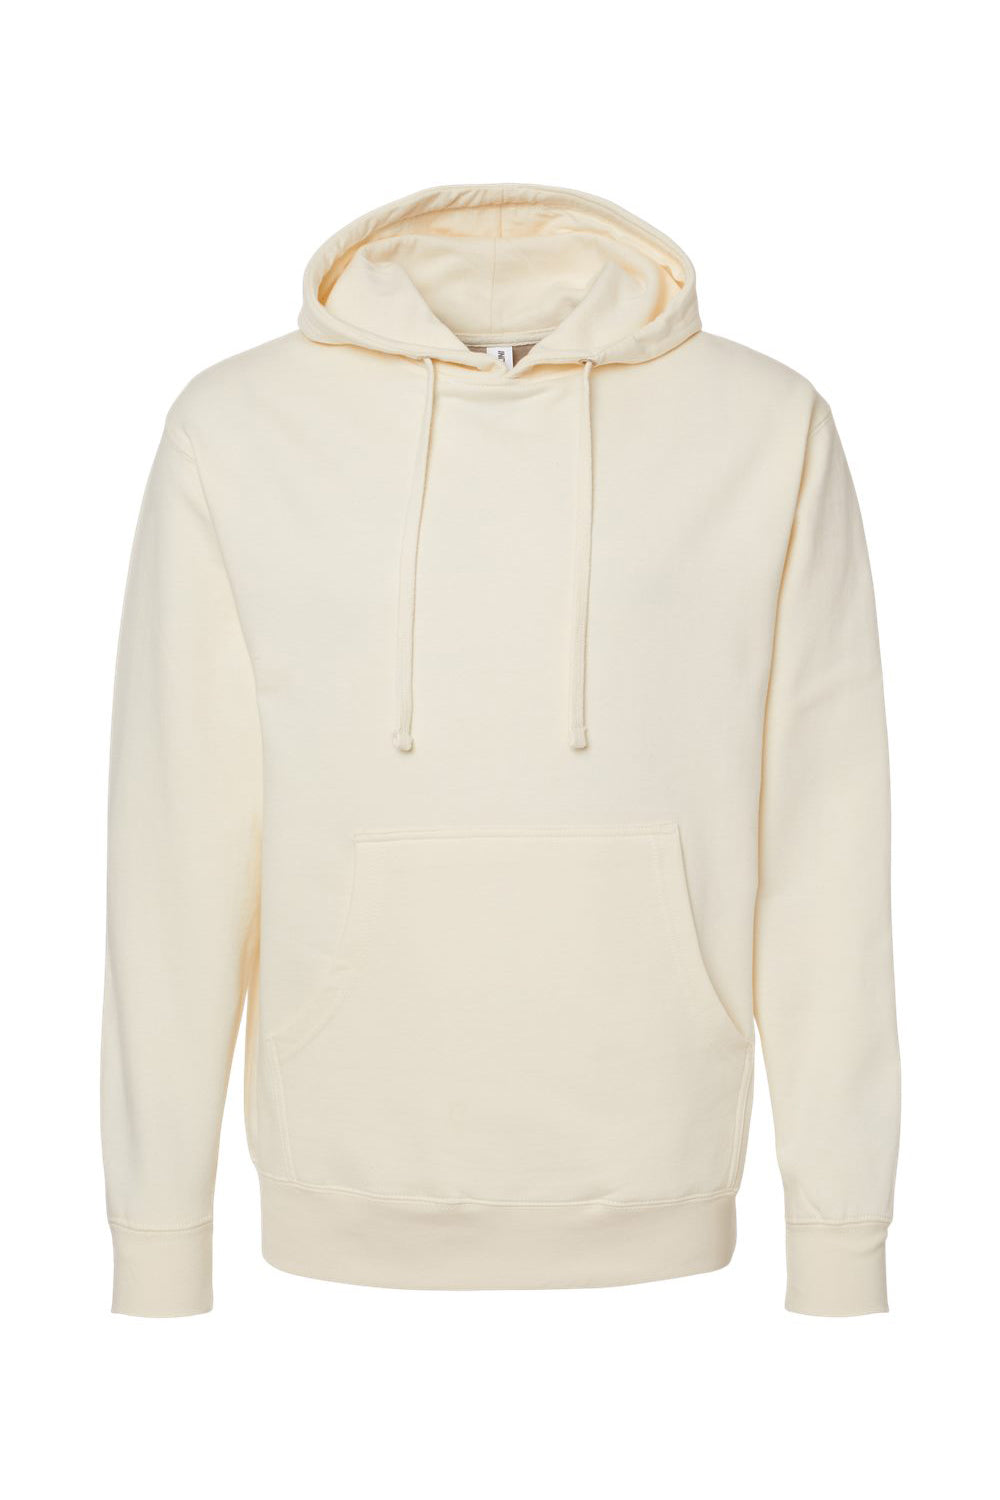 Independent Trading Co. SS4500 Mens Hooded Sweatshirt Hoodie Bone Flat Front